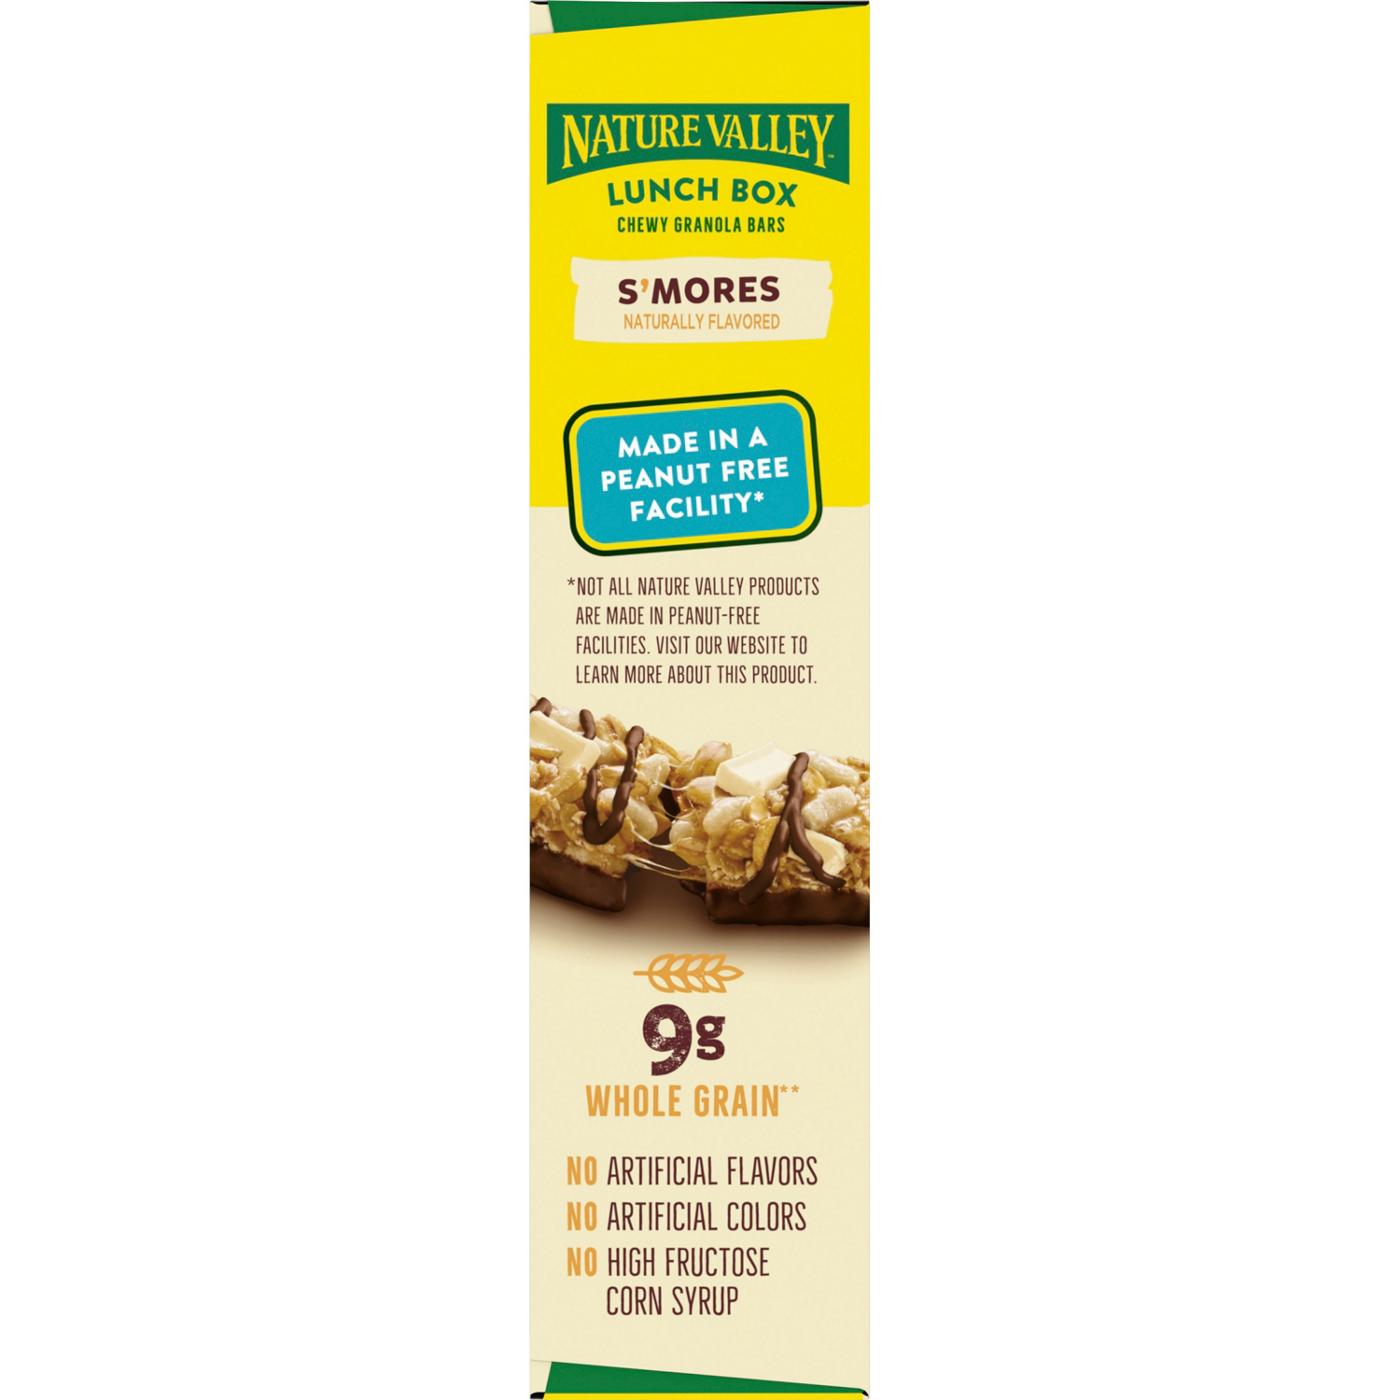 Nature Valley Lunch Box S'mores Chewy Granola Bars; image 3 of 3